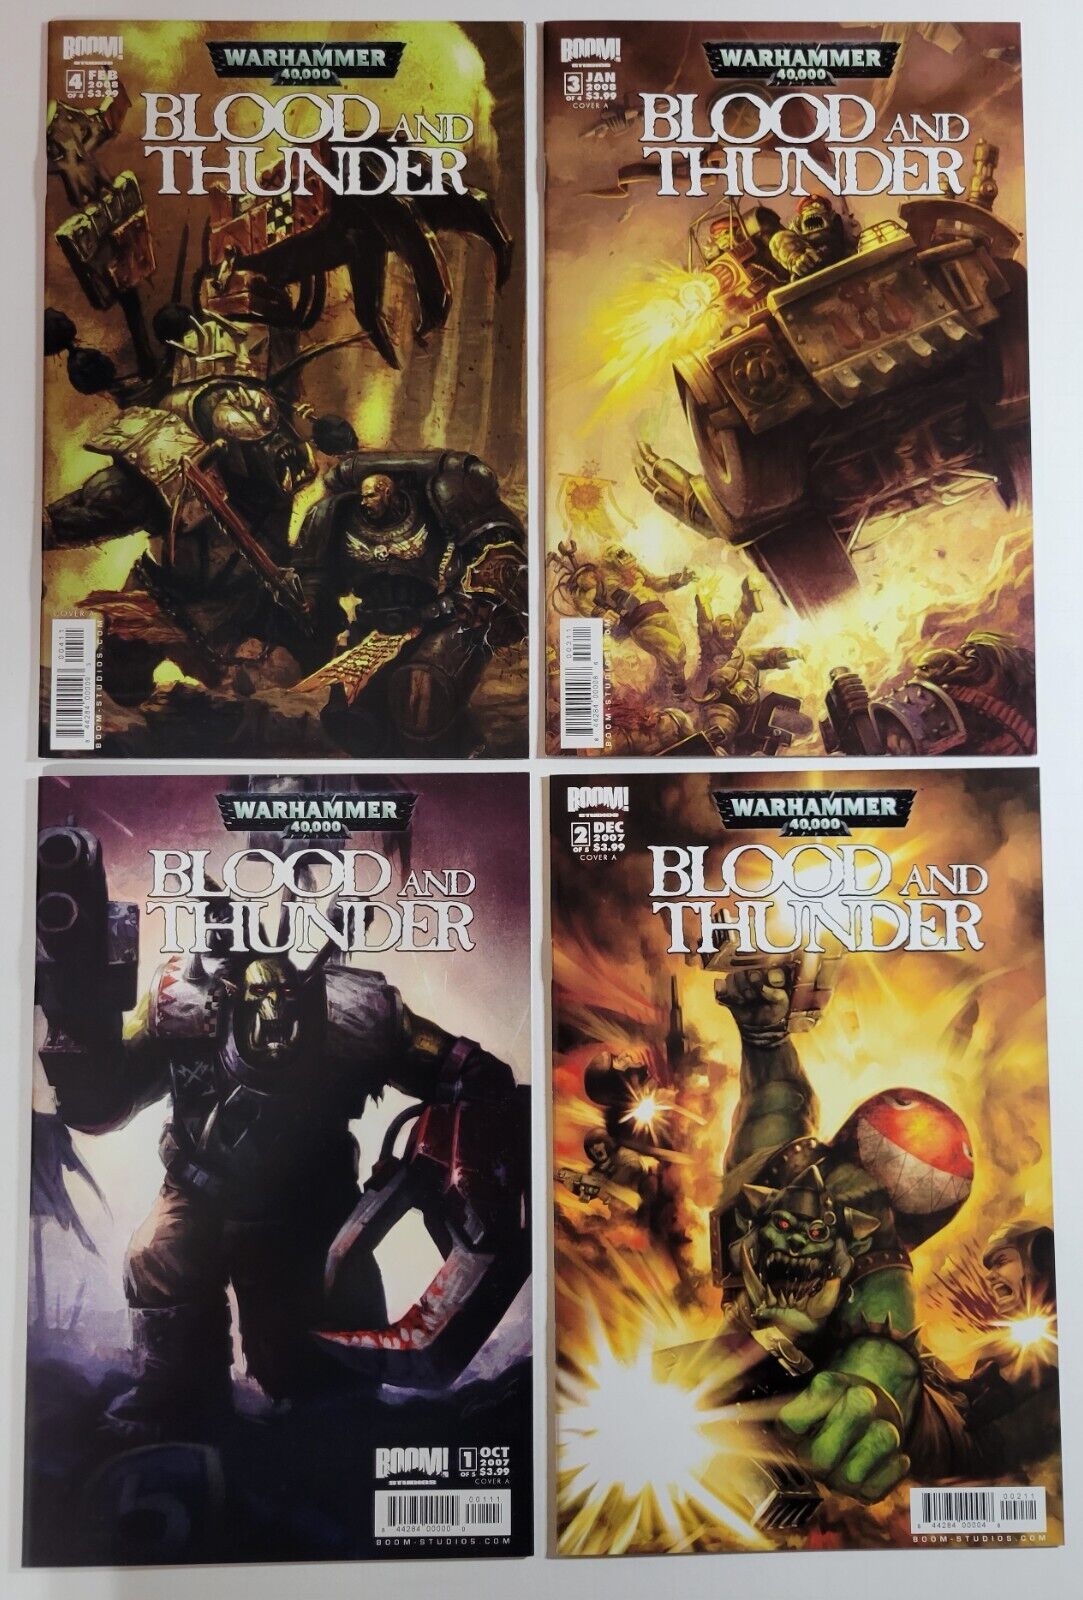 Warhammer 40k Blood and Thunder #1 #2 #3 #4 Complete Cover A Set Boom Studios